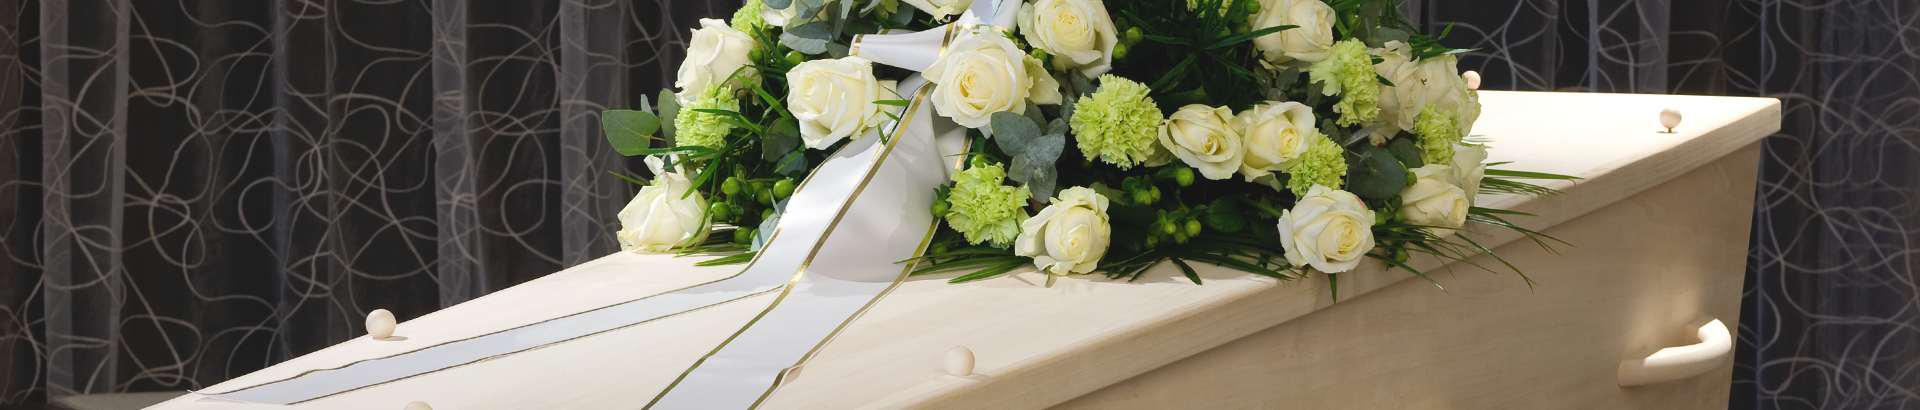 funeral homes, funeral services, General and home services